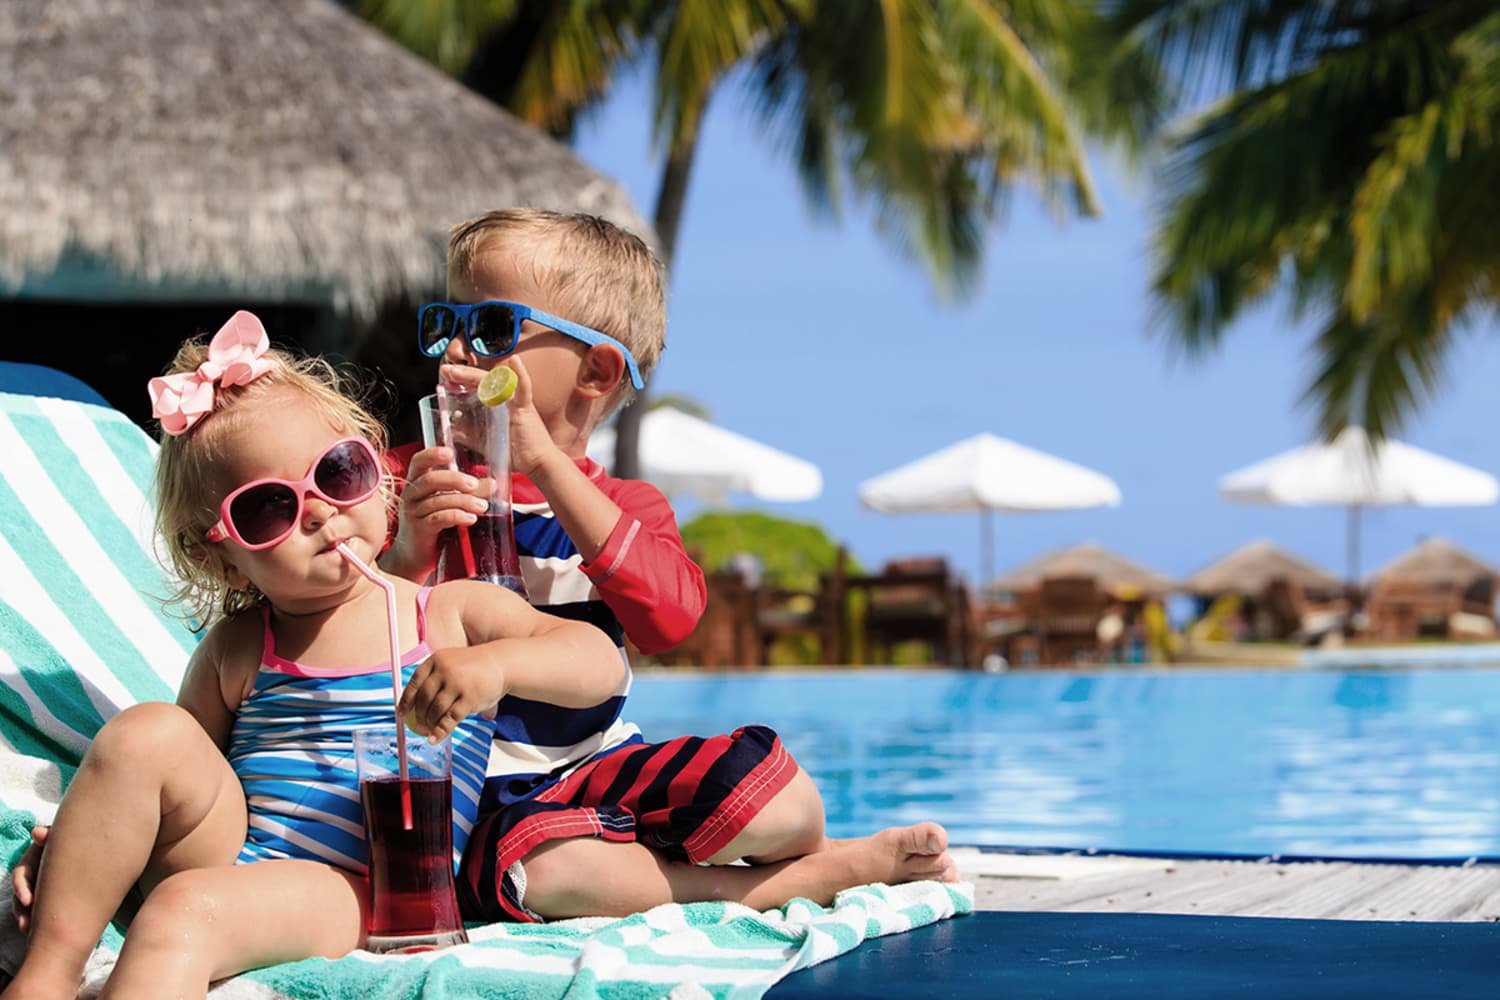 10 Wildly Fun Hotel Pools Kids Won’t Want to Leave